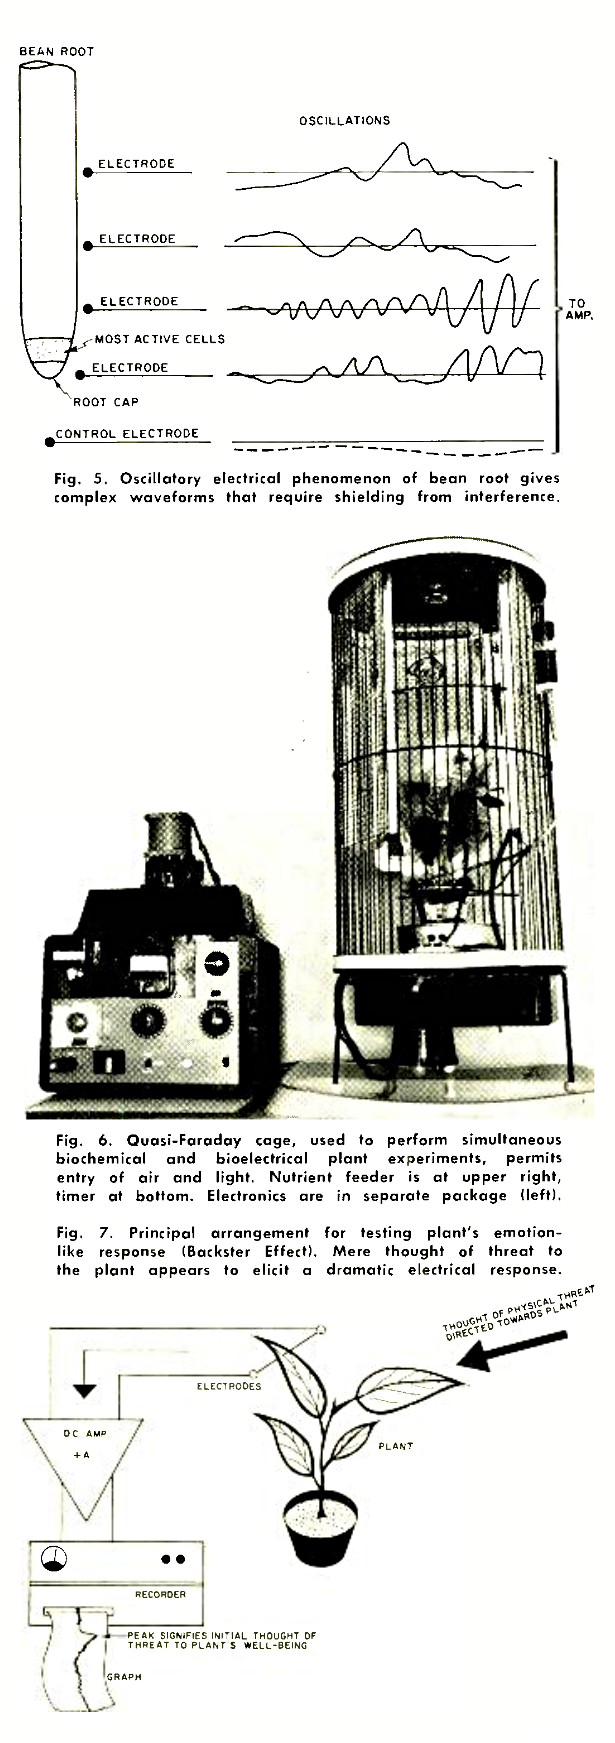 Fig. 5. Oscillatory electrical phenomenon of bean root gives complex waveforms that require shielding from interference. :: Fig. 6. Quasi-Faraday cage, used to perform simultaneous biochemical and bioelectrical plant experiments, permits entry of air and light. Nutrient feeder is at upper right, timer at bottom. Electronics are in separate package (left). :: Fig. 7. Principle arrangement for testing plant's emotion-like response (Backster Effect). Mere thought of threat to the plant appears to elicit a dramatic electrical response.